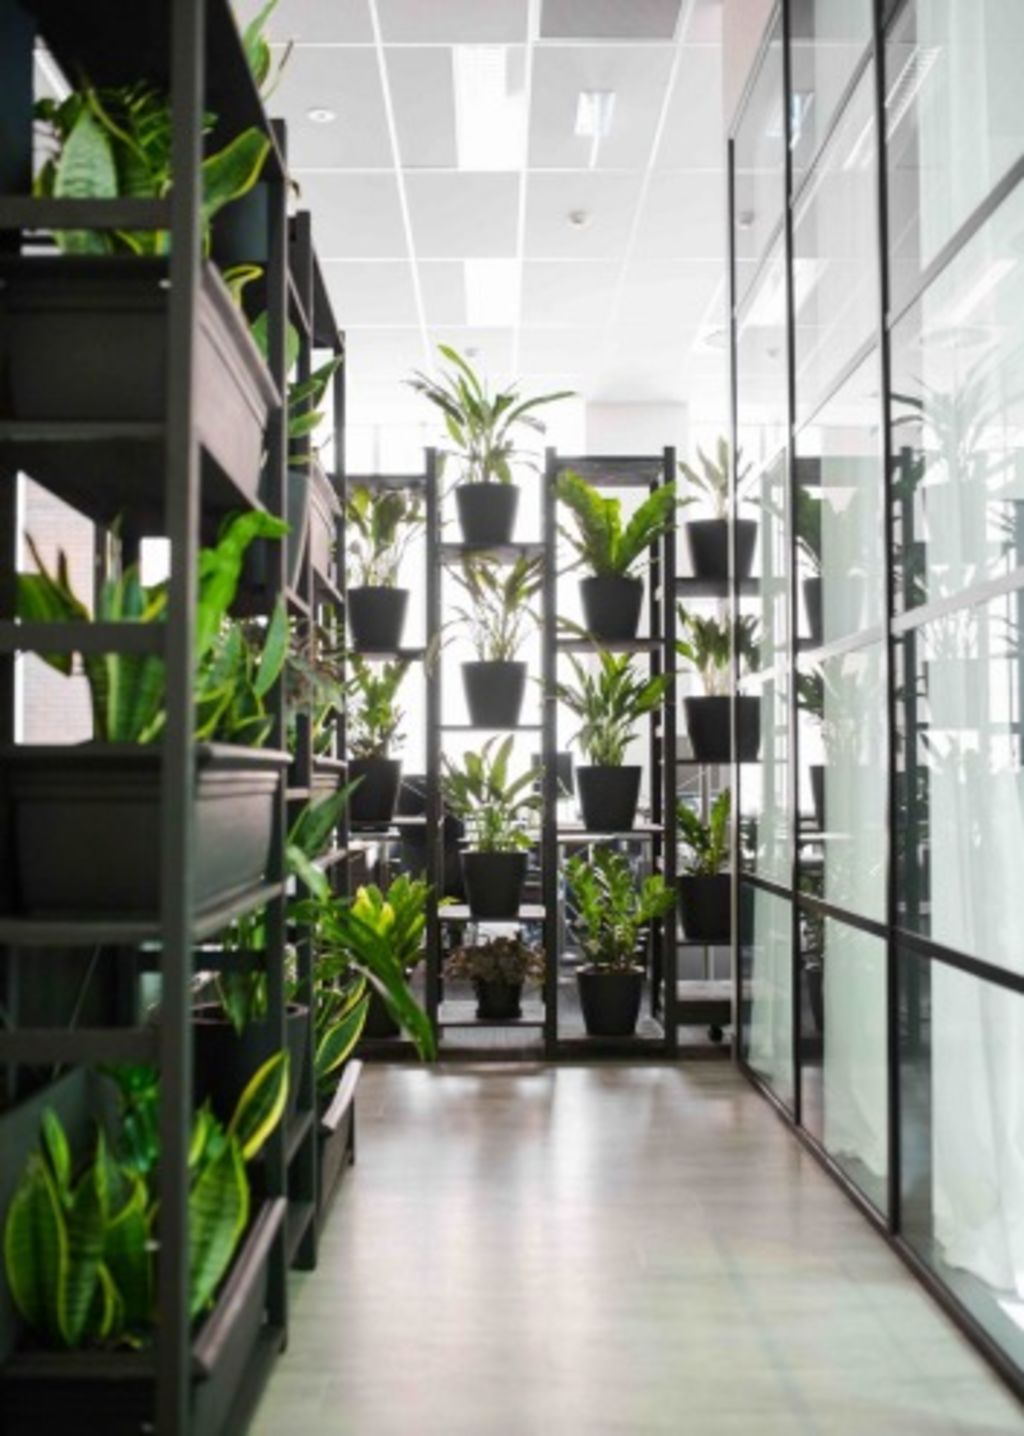 A greenery wall is used to create privacy in the office.